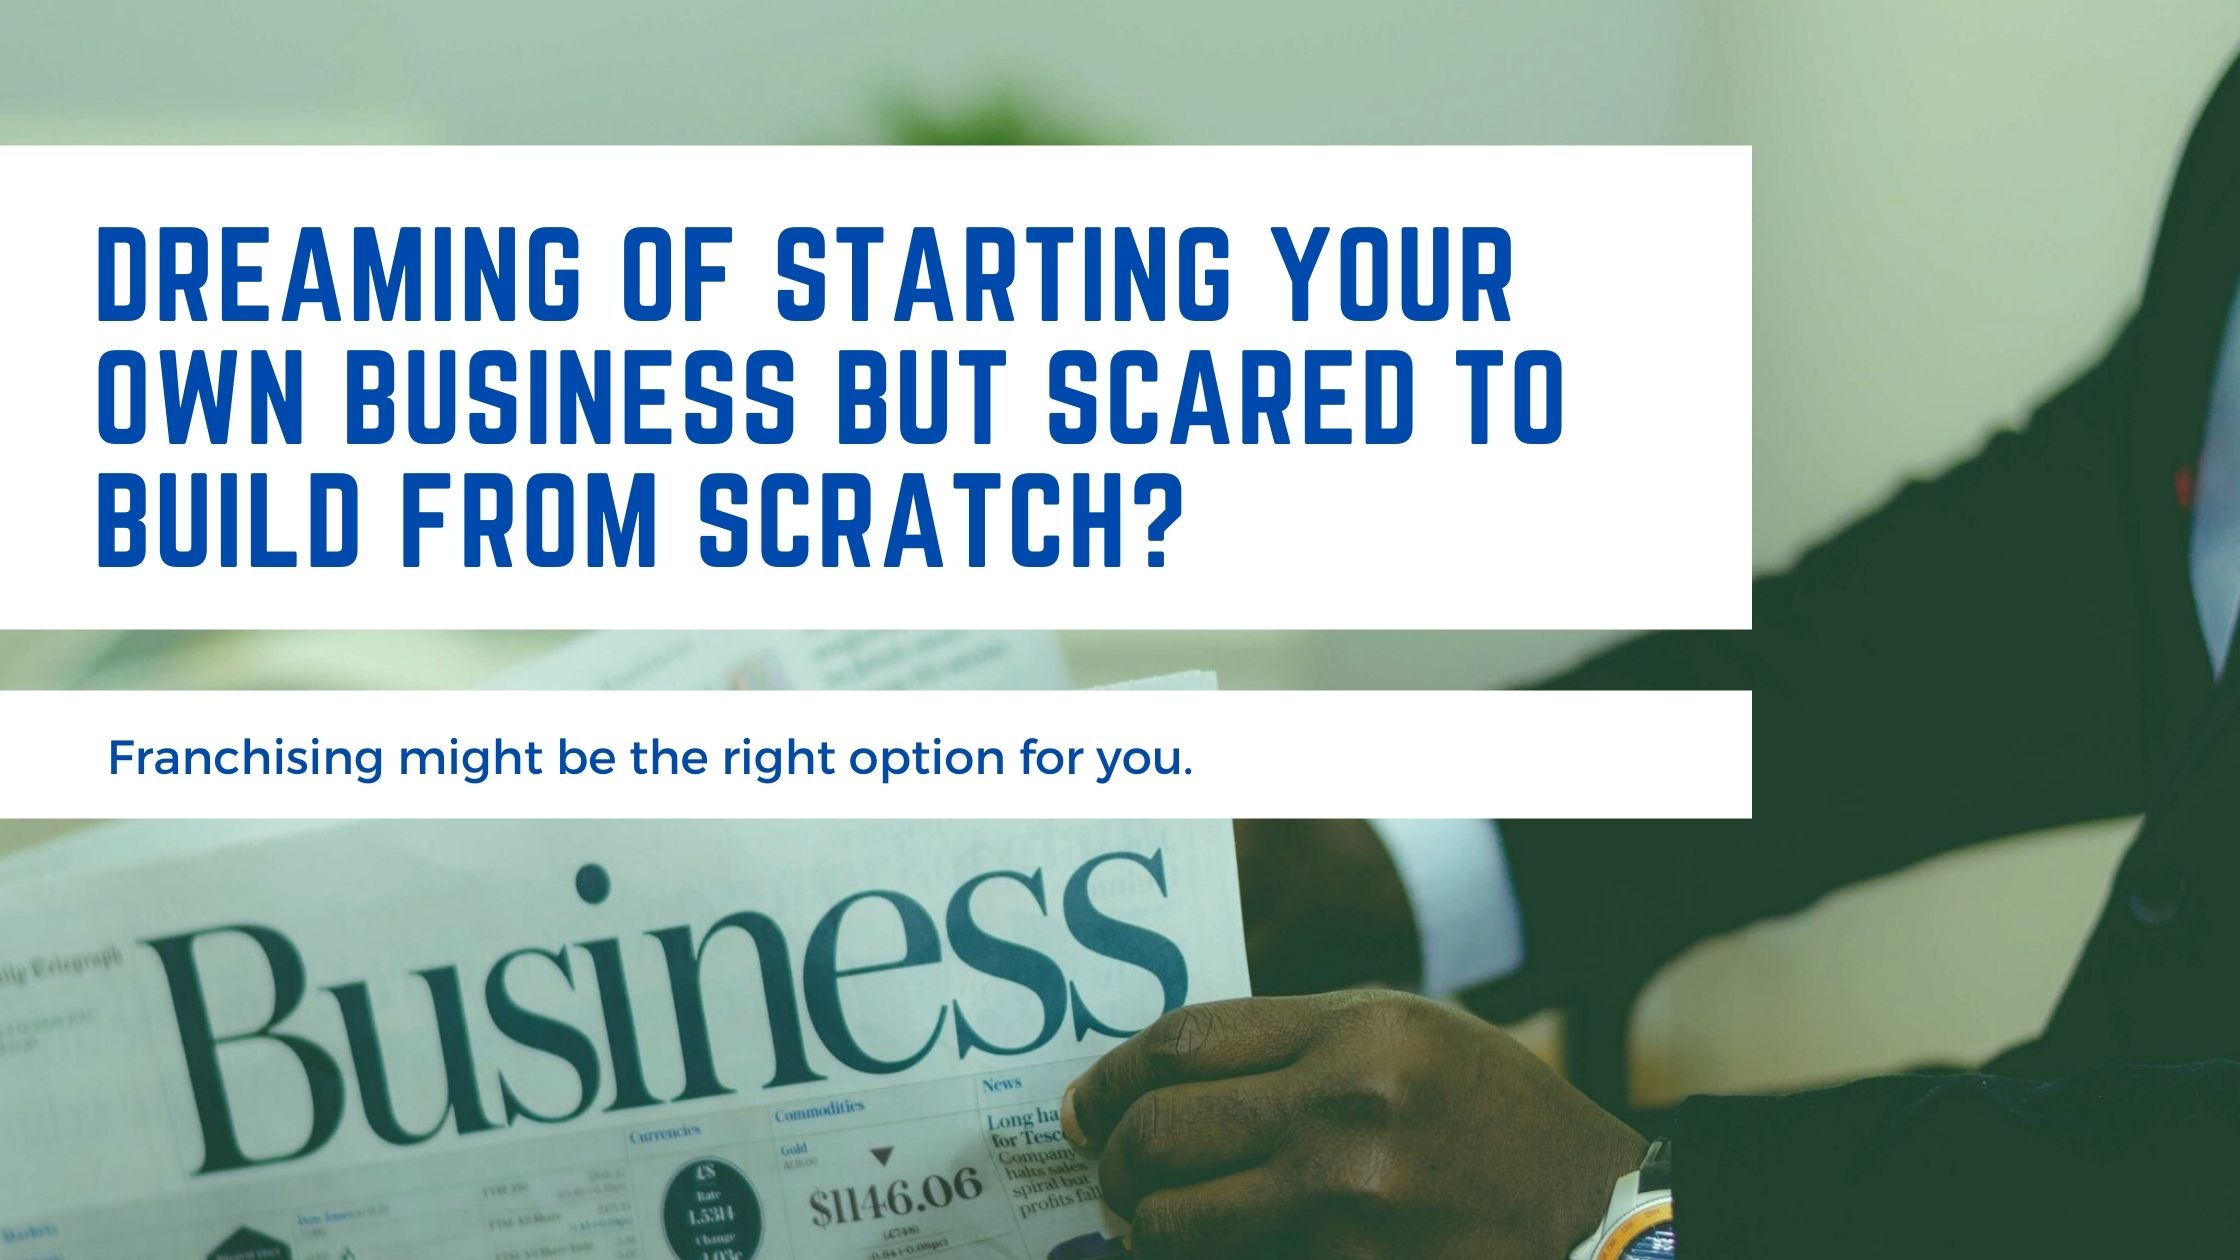 Dreaming of starting your own business but scared to build from scratch? Franchising might be the right option for you.